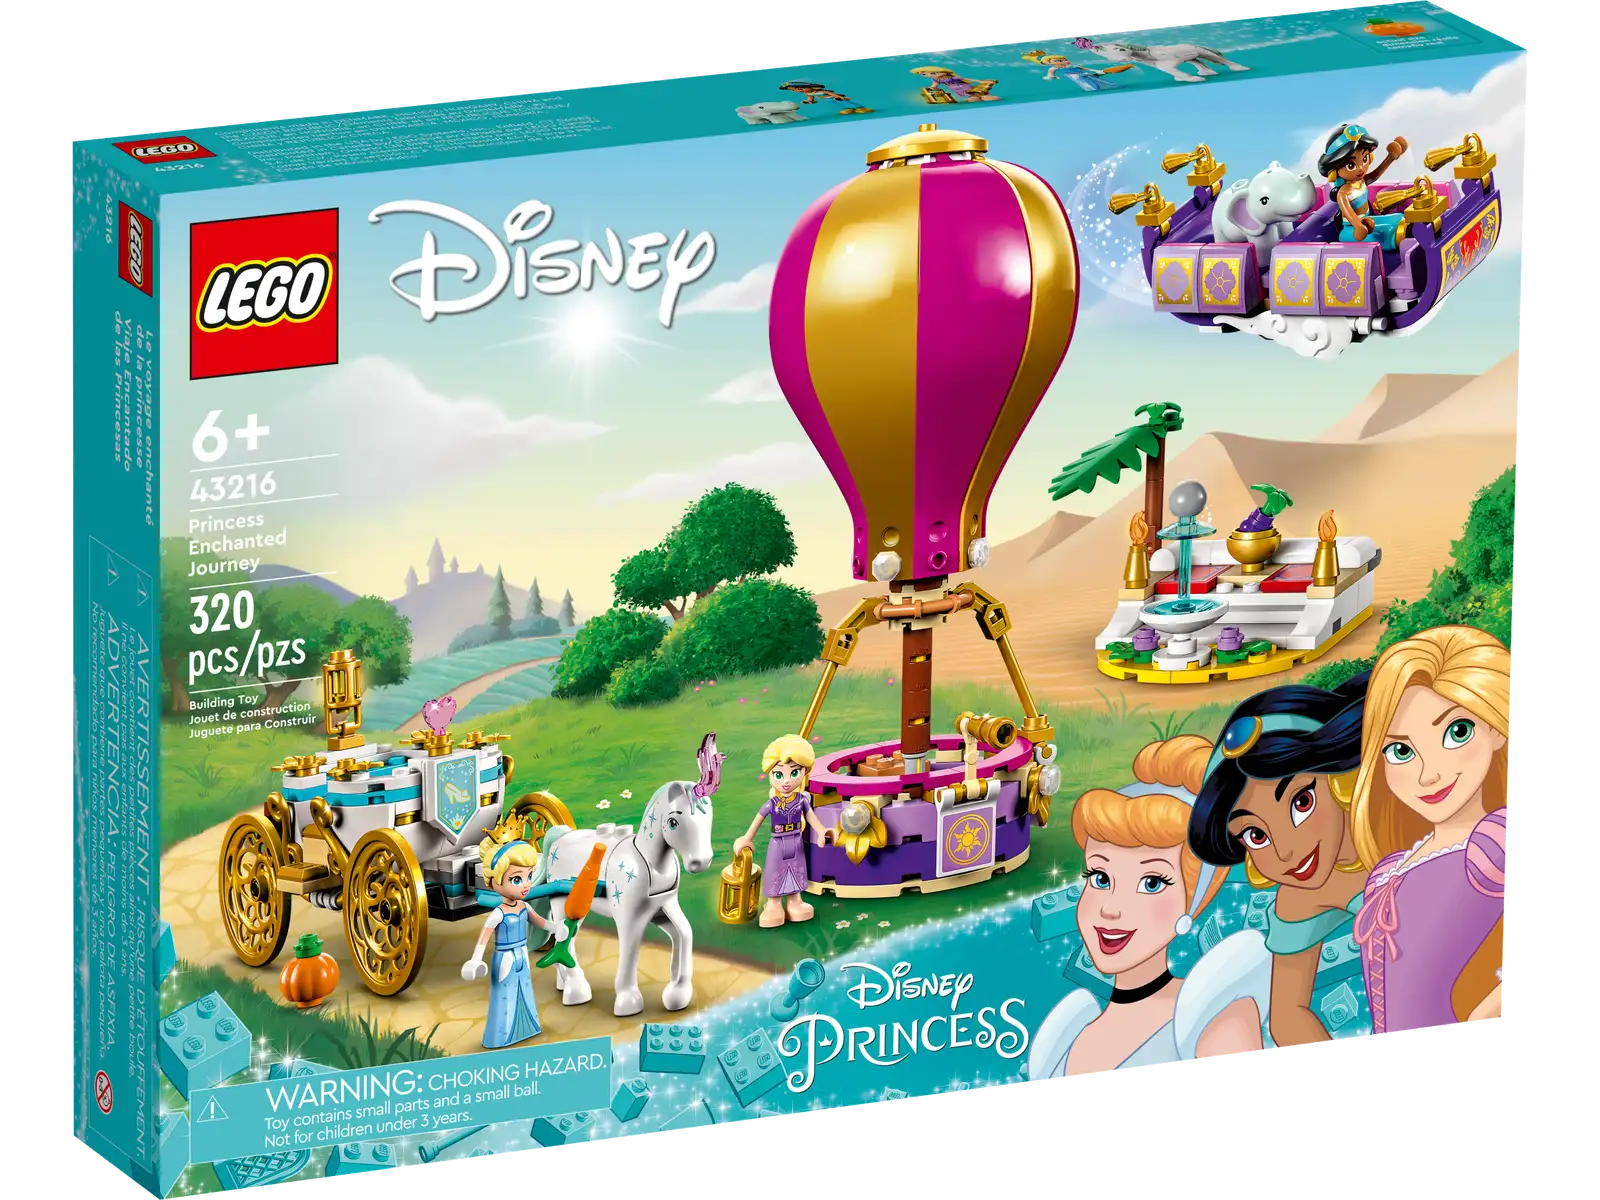 Kids aged 6 and up and fans of Disney’s Aladdin, Cinderella and Rapunzel will be inspired by this LEGO® ǀ Disney Princess Enchanted Journey (43216) set, featuring 3 buildable modes of travel, a small lounge build, 3 LEGO mini-doll figures and 2 LEGO animal figures. As they build, kids can enjoy an easy and intuitive building adventure with the LEGO Builder app. Here they can zoom in and rotate models in 3D, save sets and track their progress. A passion for travel and fun These Disney Princess builds help grow children’s confidence, then spark their imagination and creativity as they play out their own stories with beloved characters. This set is great for group play and can be added to other LEGO ǀ Disney sets (sold separately) to expand the play even further. Iconic collection of characters This set encourages play with Disney’s Cinderella, Jasmine and Rapunzel, and it makes a fun gift experience that Disney fans of any age will enjoy building and exploring. Open-ended fun – Give a Disney Princess fan or any kid who likes to travel a gift full of details to inspire the imagination with this LEGO® ǀ Disney Princess Enchanted Journey (43216) set Creativity in a box – This set includes 3 buildable transport possibilities: a hot-air balloon, open-top carriage and flying carpet, plus a small lounge build and lots of accessories to spark play Beloved characters – Featuring Disney Princess Cinderella, Jasmine and Rapunzel, plus LEGO® horse and baby elephant figures, the set is designed for unlimited fun and imagination Fun gift for ages 6+ – This set makes a creative gift for a Disney fan, child or a group of kids with a passion for their favorite Disney Princess characters or travel play Ready for everyday play – The hot-air balloon measures over 7 in. (18 cm) high, 3.5 in (9 cm) long and 3 in. (8 cm) wide, and all 3 builds are made for endless play sessions A new way to build – Let the LEGO® Builder app guide kids on an intuitive building adventure. They can save sets, track progress and zoom in and rotate models in 3D while they build Important life skills – With detailed LEGO® mini-doll figures and 4 recognizable builds, this Disney Princess construction set fosters creative play that helps build vital life skills through fun Uncompromising quality – Ever since 1958, LEGO® components have met stringent industry standards to ensure they connect consistently Safety first – LEGO® components are dropped, heated, crushed, twisted and analyzed to make sure they meet rigorous global safety standards